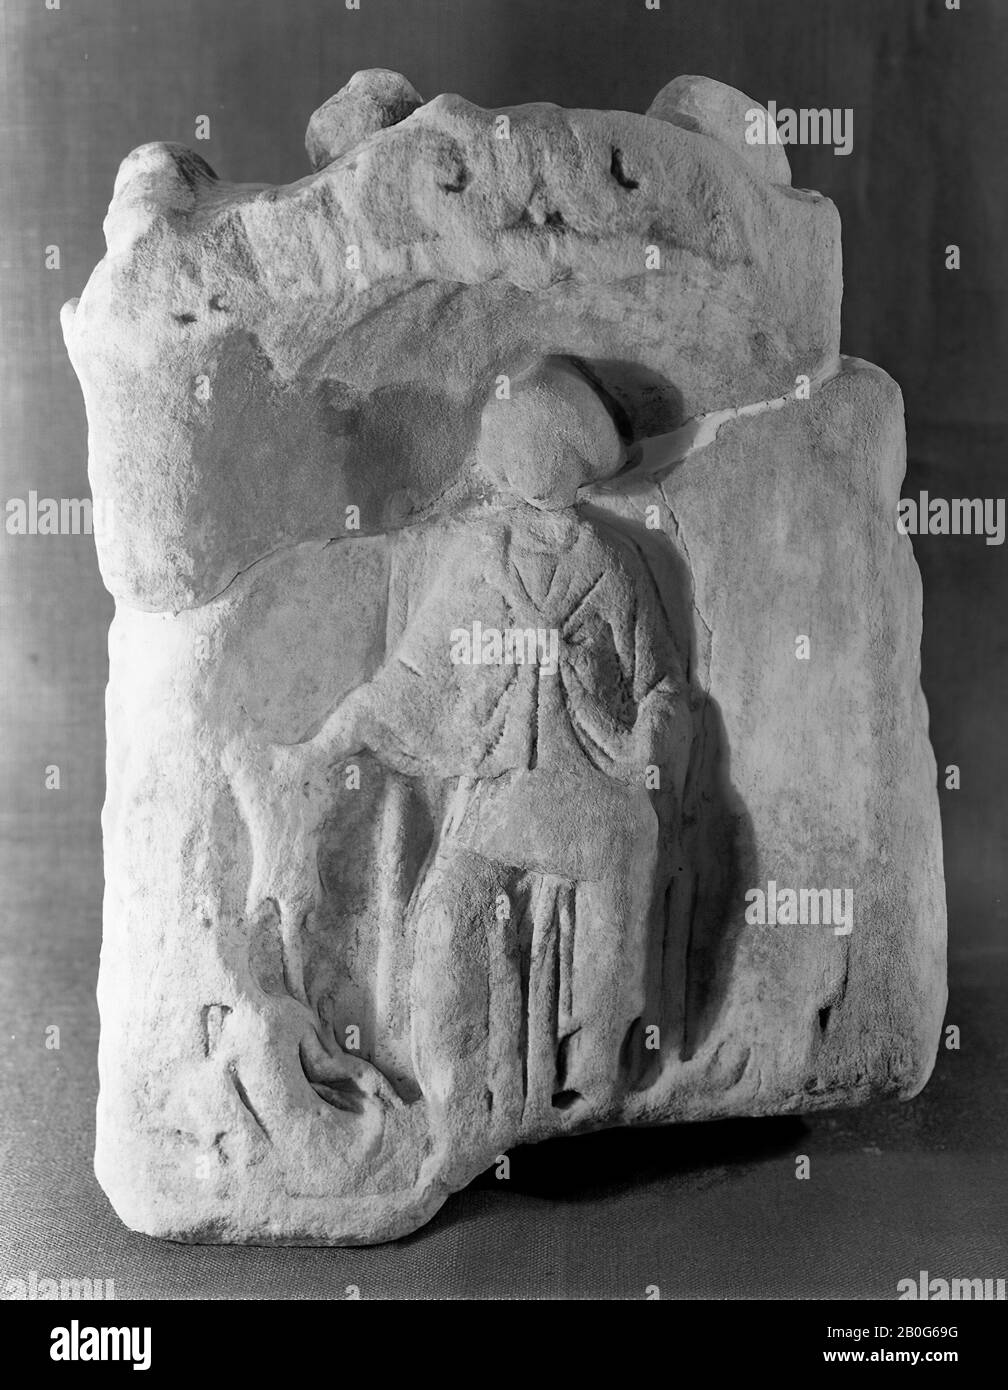 Altar with niche. Sandstone. The lower part with possible inscription is missing. The upper part has been restored from 2 pieces. A corner has broken off at the top right. Nehalennia sitting. The niche is painted blue around the seat with a high back. The shell has remained unpainted. In her right hand she holds a ship's rudder that rests alongside her on the ground. She holds a large object on the left knee. Her clothing is very different than normal, the question is whether there is a shoulder cloak present. On her right side there is a half-seated, half-lying figure on the ground that has a Stock Photo